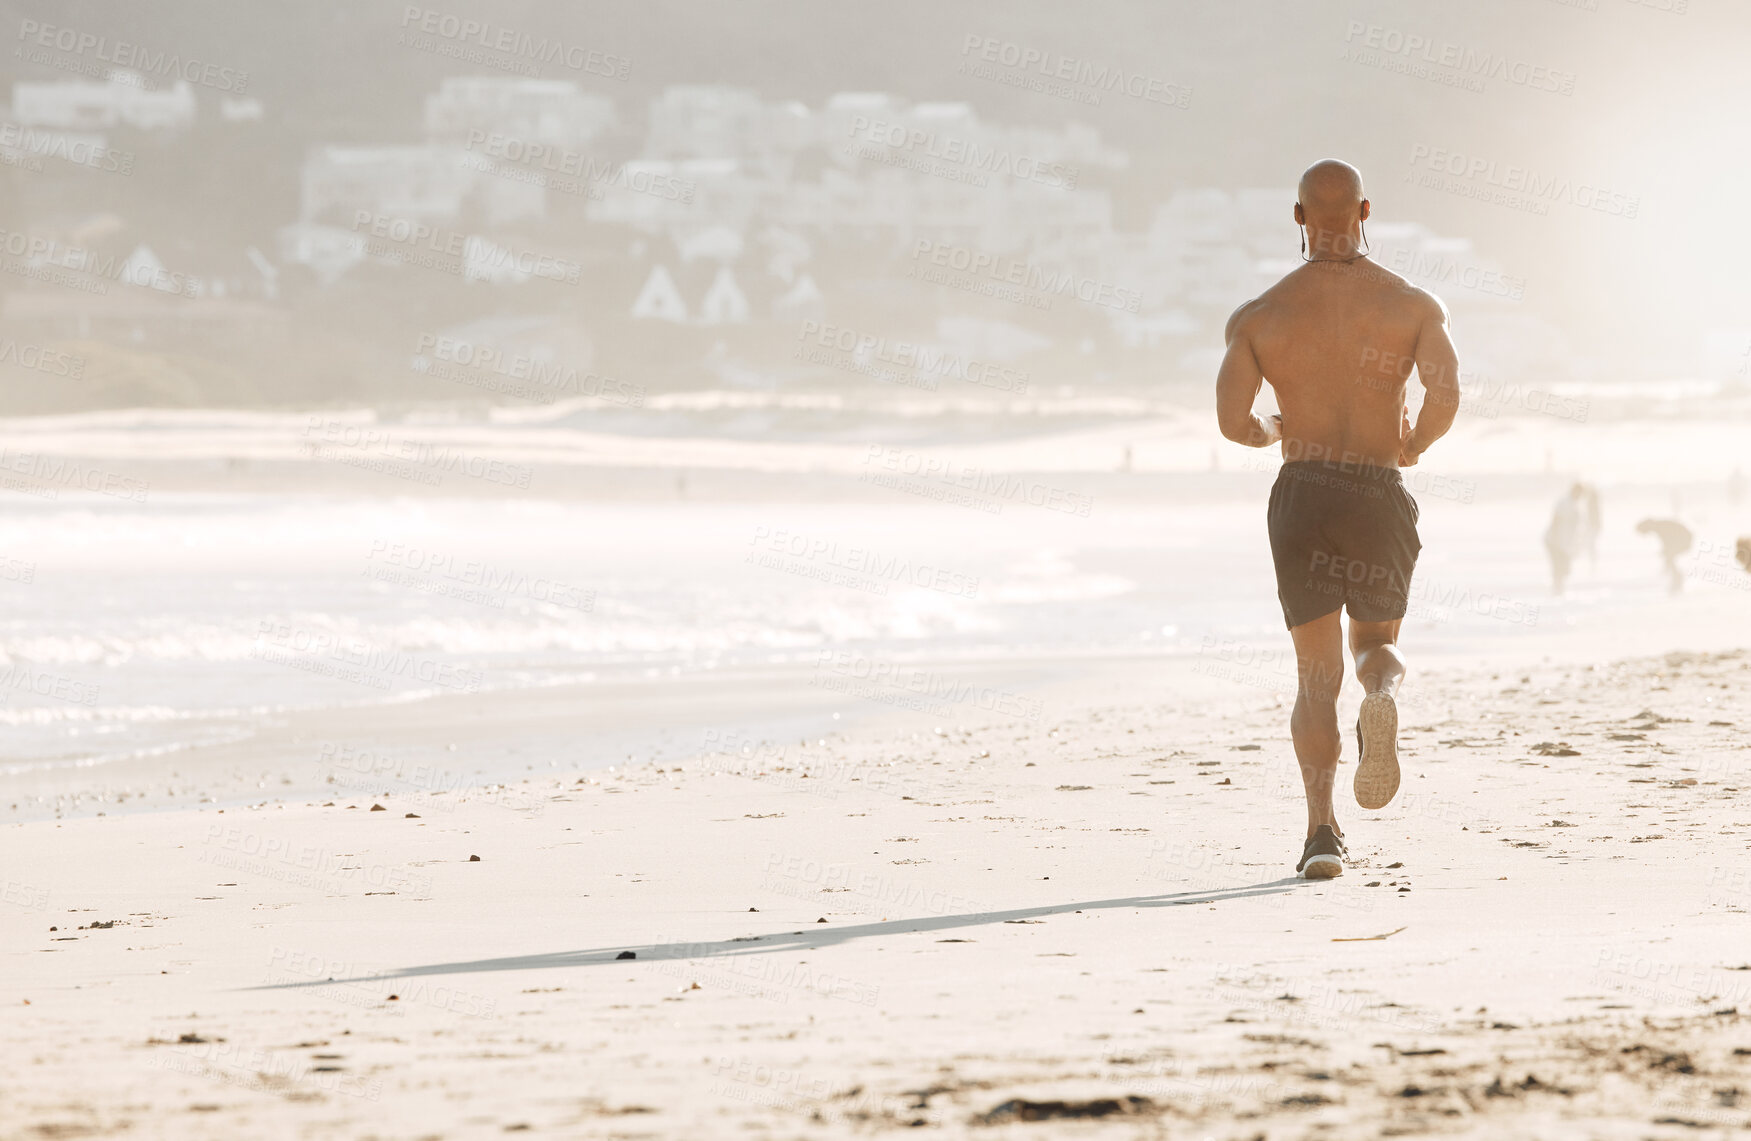 Buy stock photo Shot of a man running on the beach